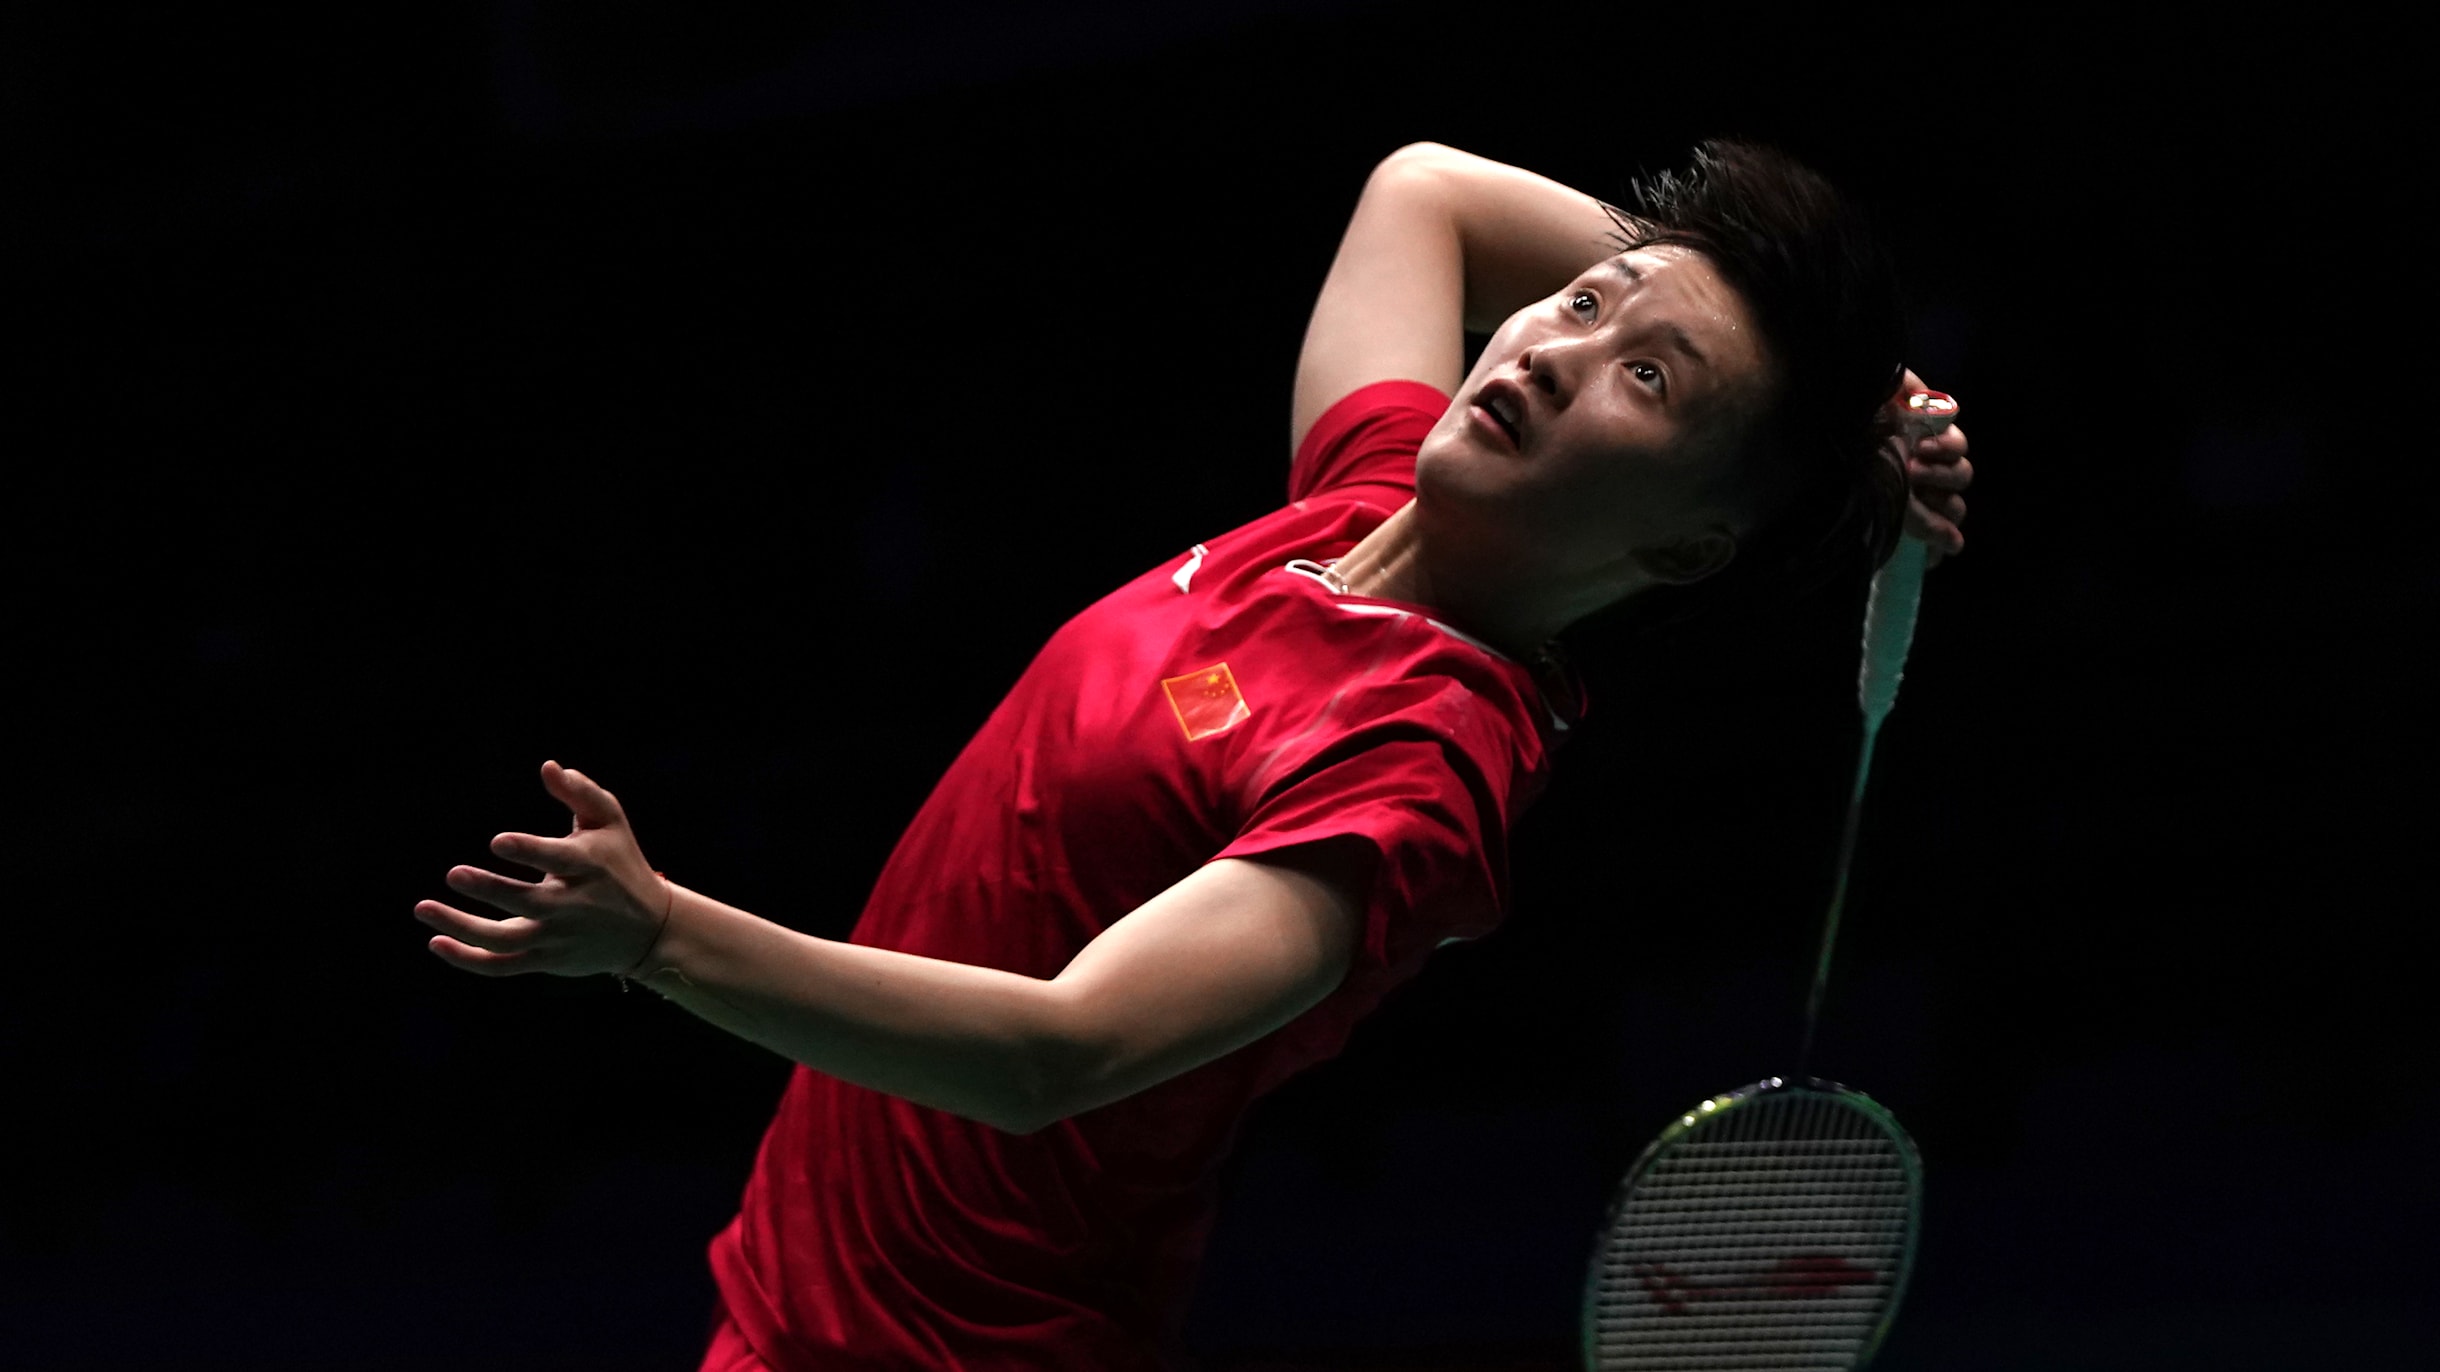 New qualifying regulations announced for badminton